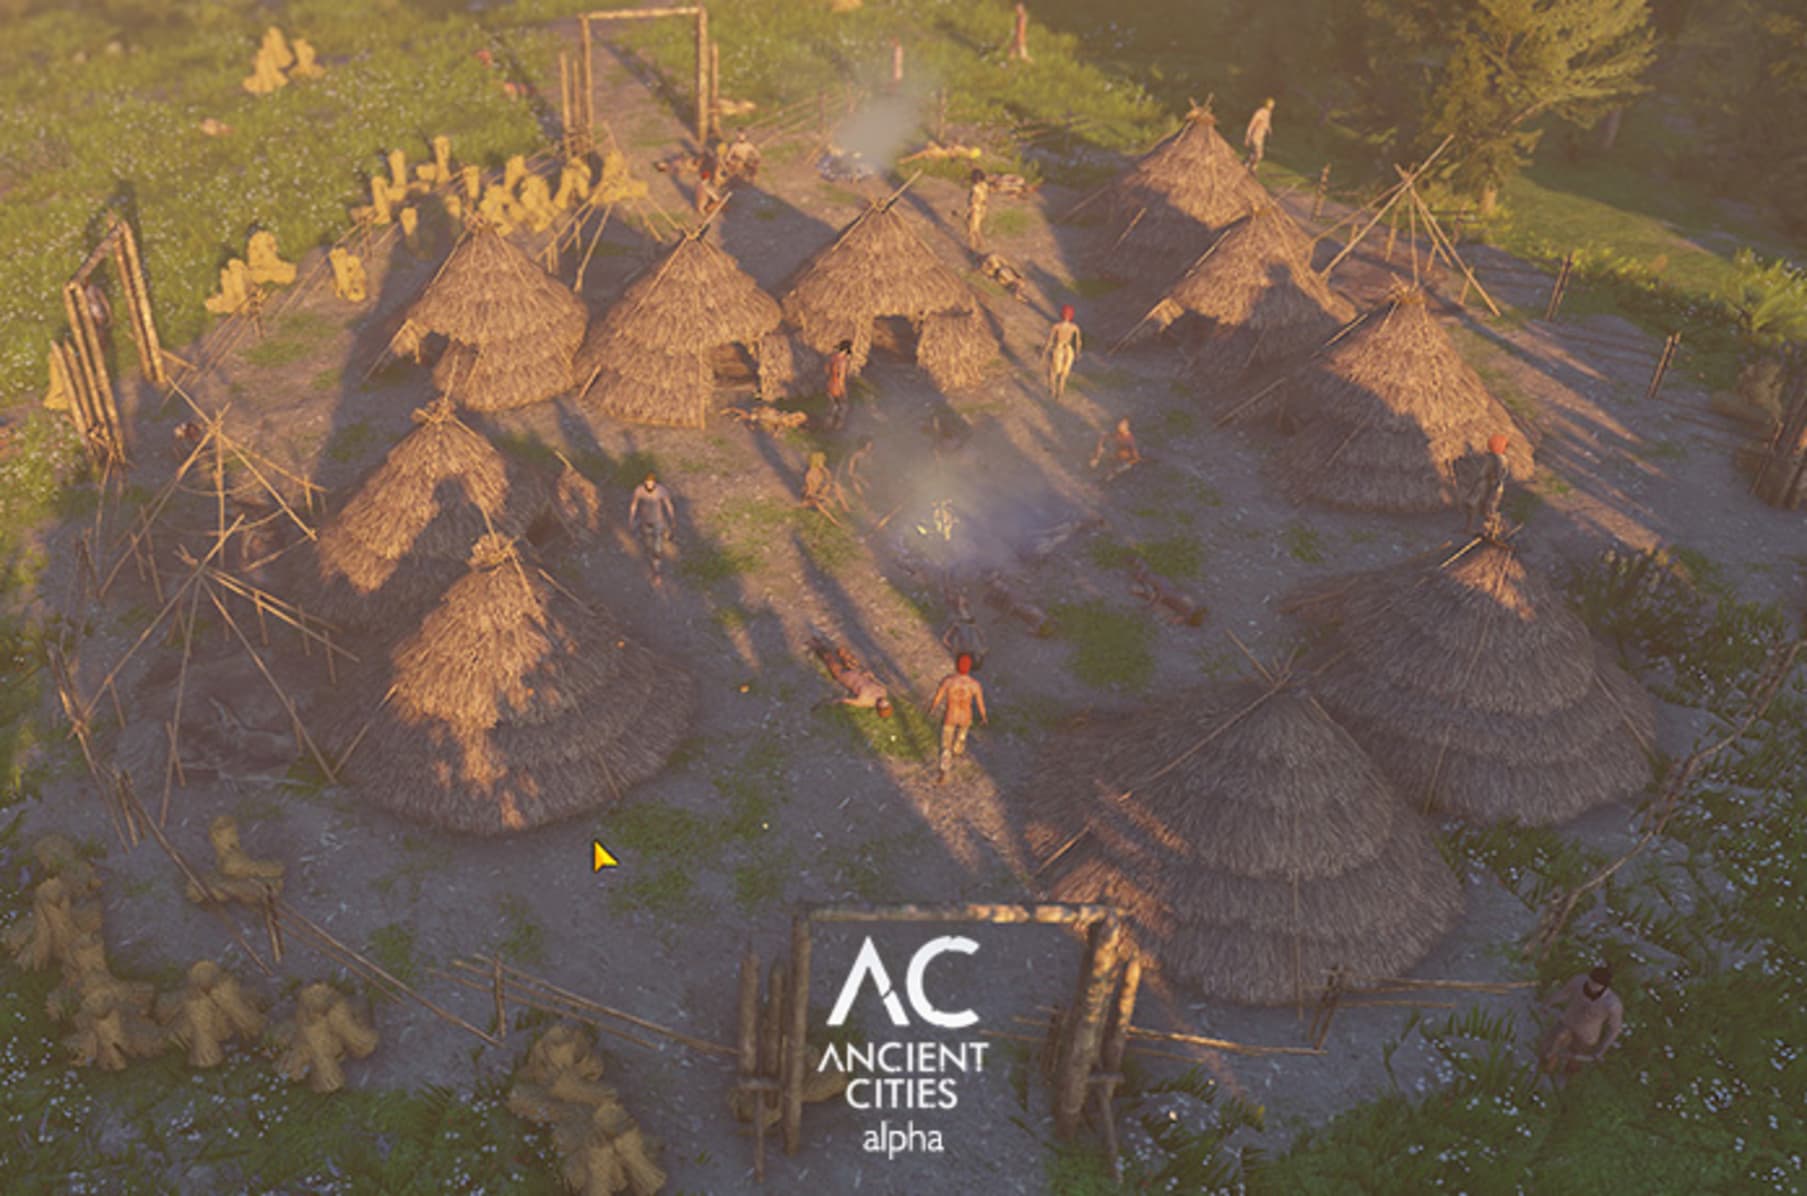 TOP 10 - ANCIENT CITY BUILDING GAMES FOR PC # 🎮 